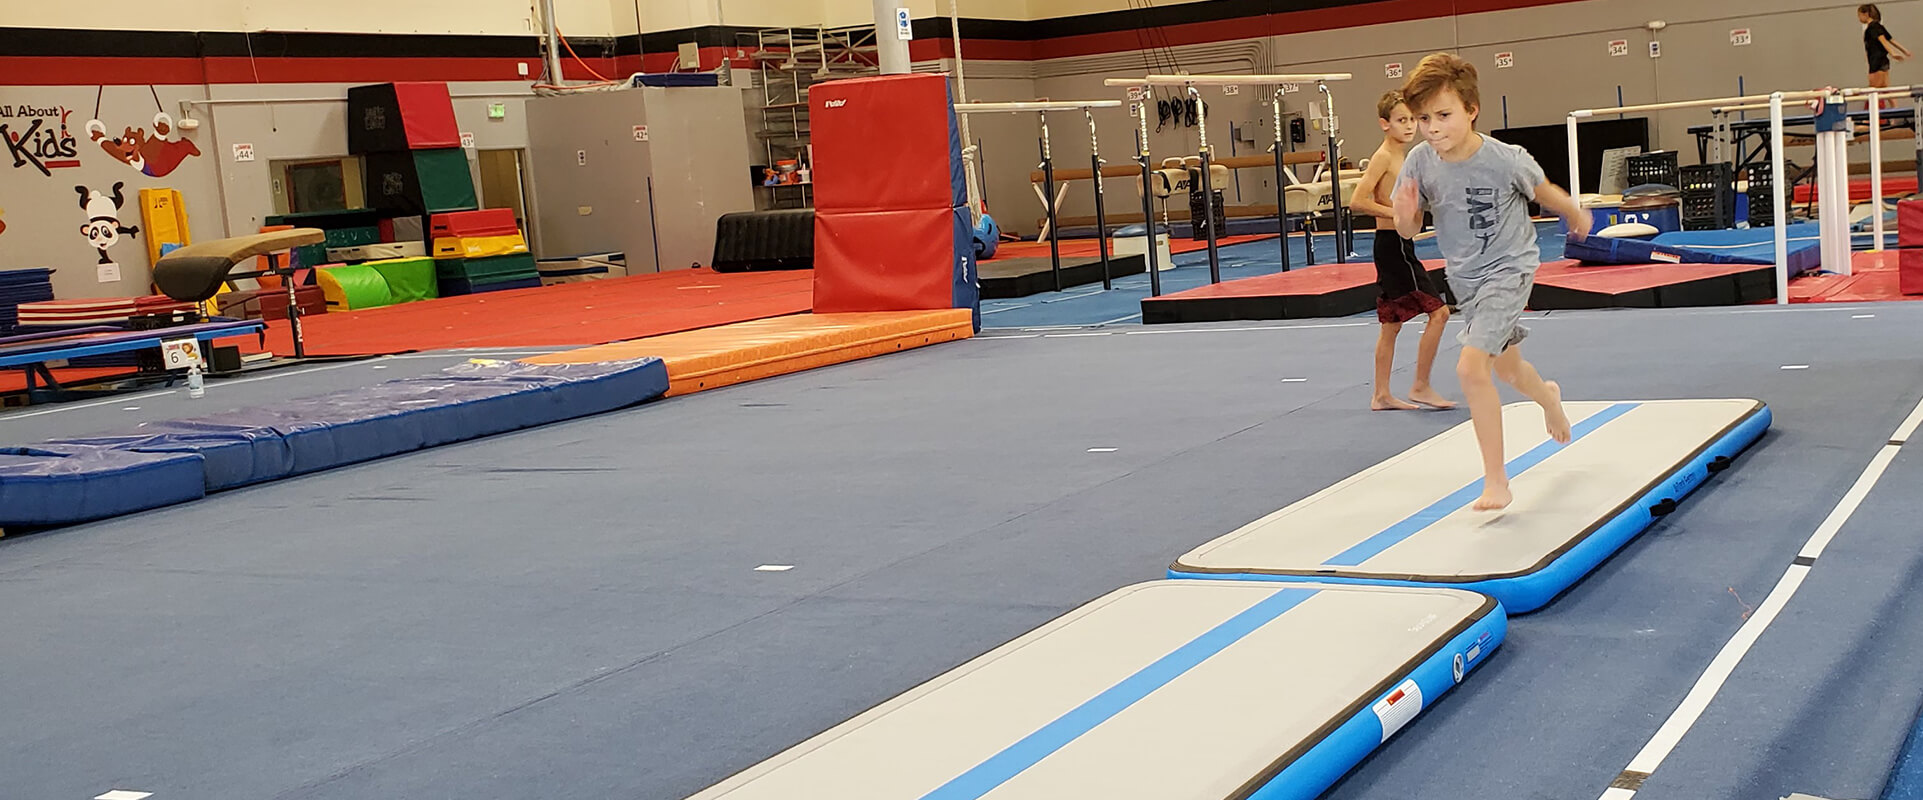 The Benefits of Having a Gymnastics Mat or Airtracks at home – ACON USA